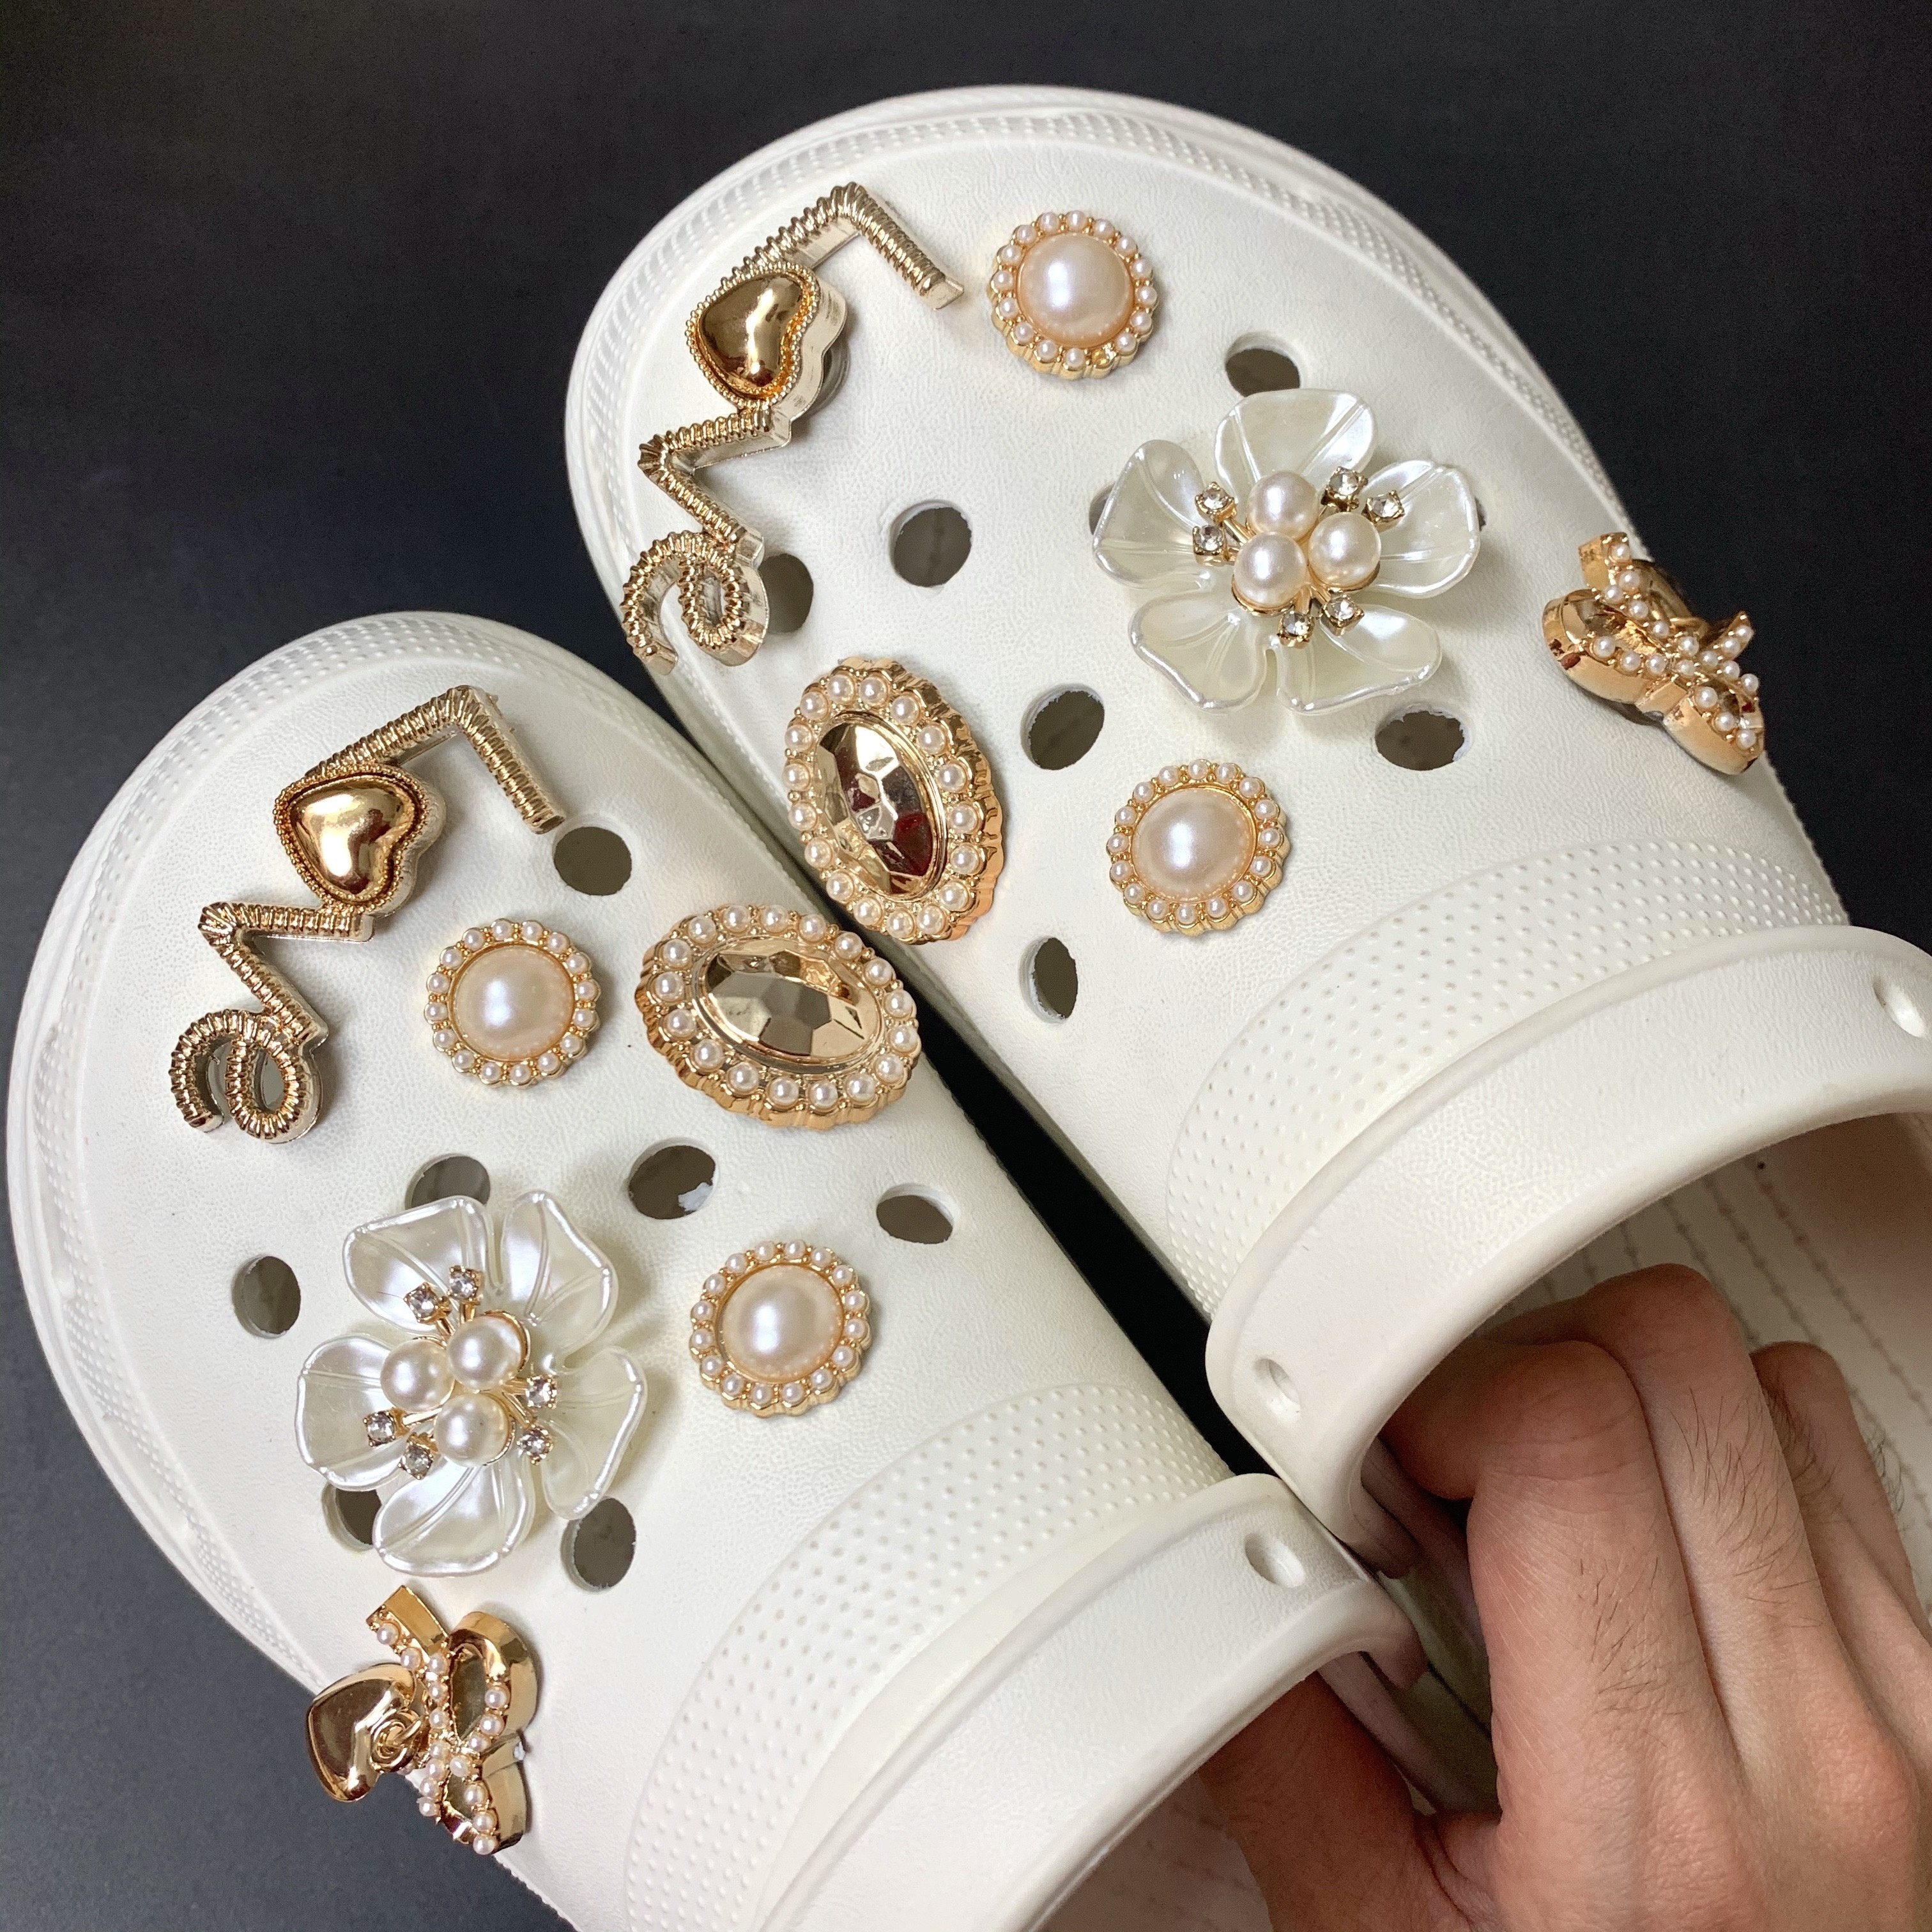 Trendy Chains Croc Charms Designer DIY Cute Rhinestone Shoes Decaration  Jibb for Croc Clogs Buckle Kids Girls Women Gifts